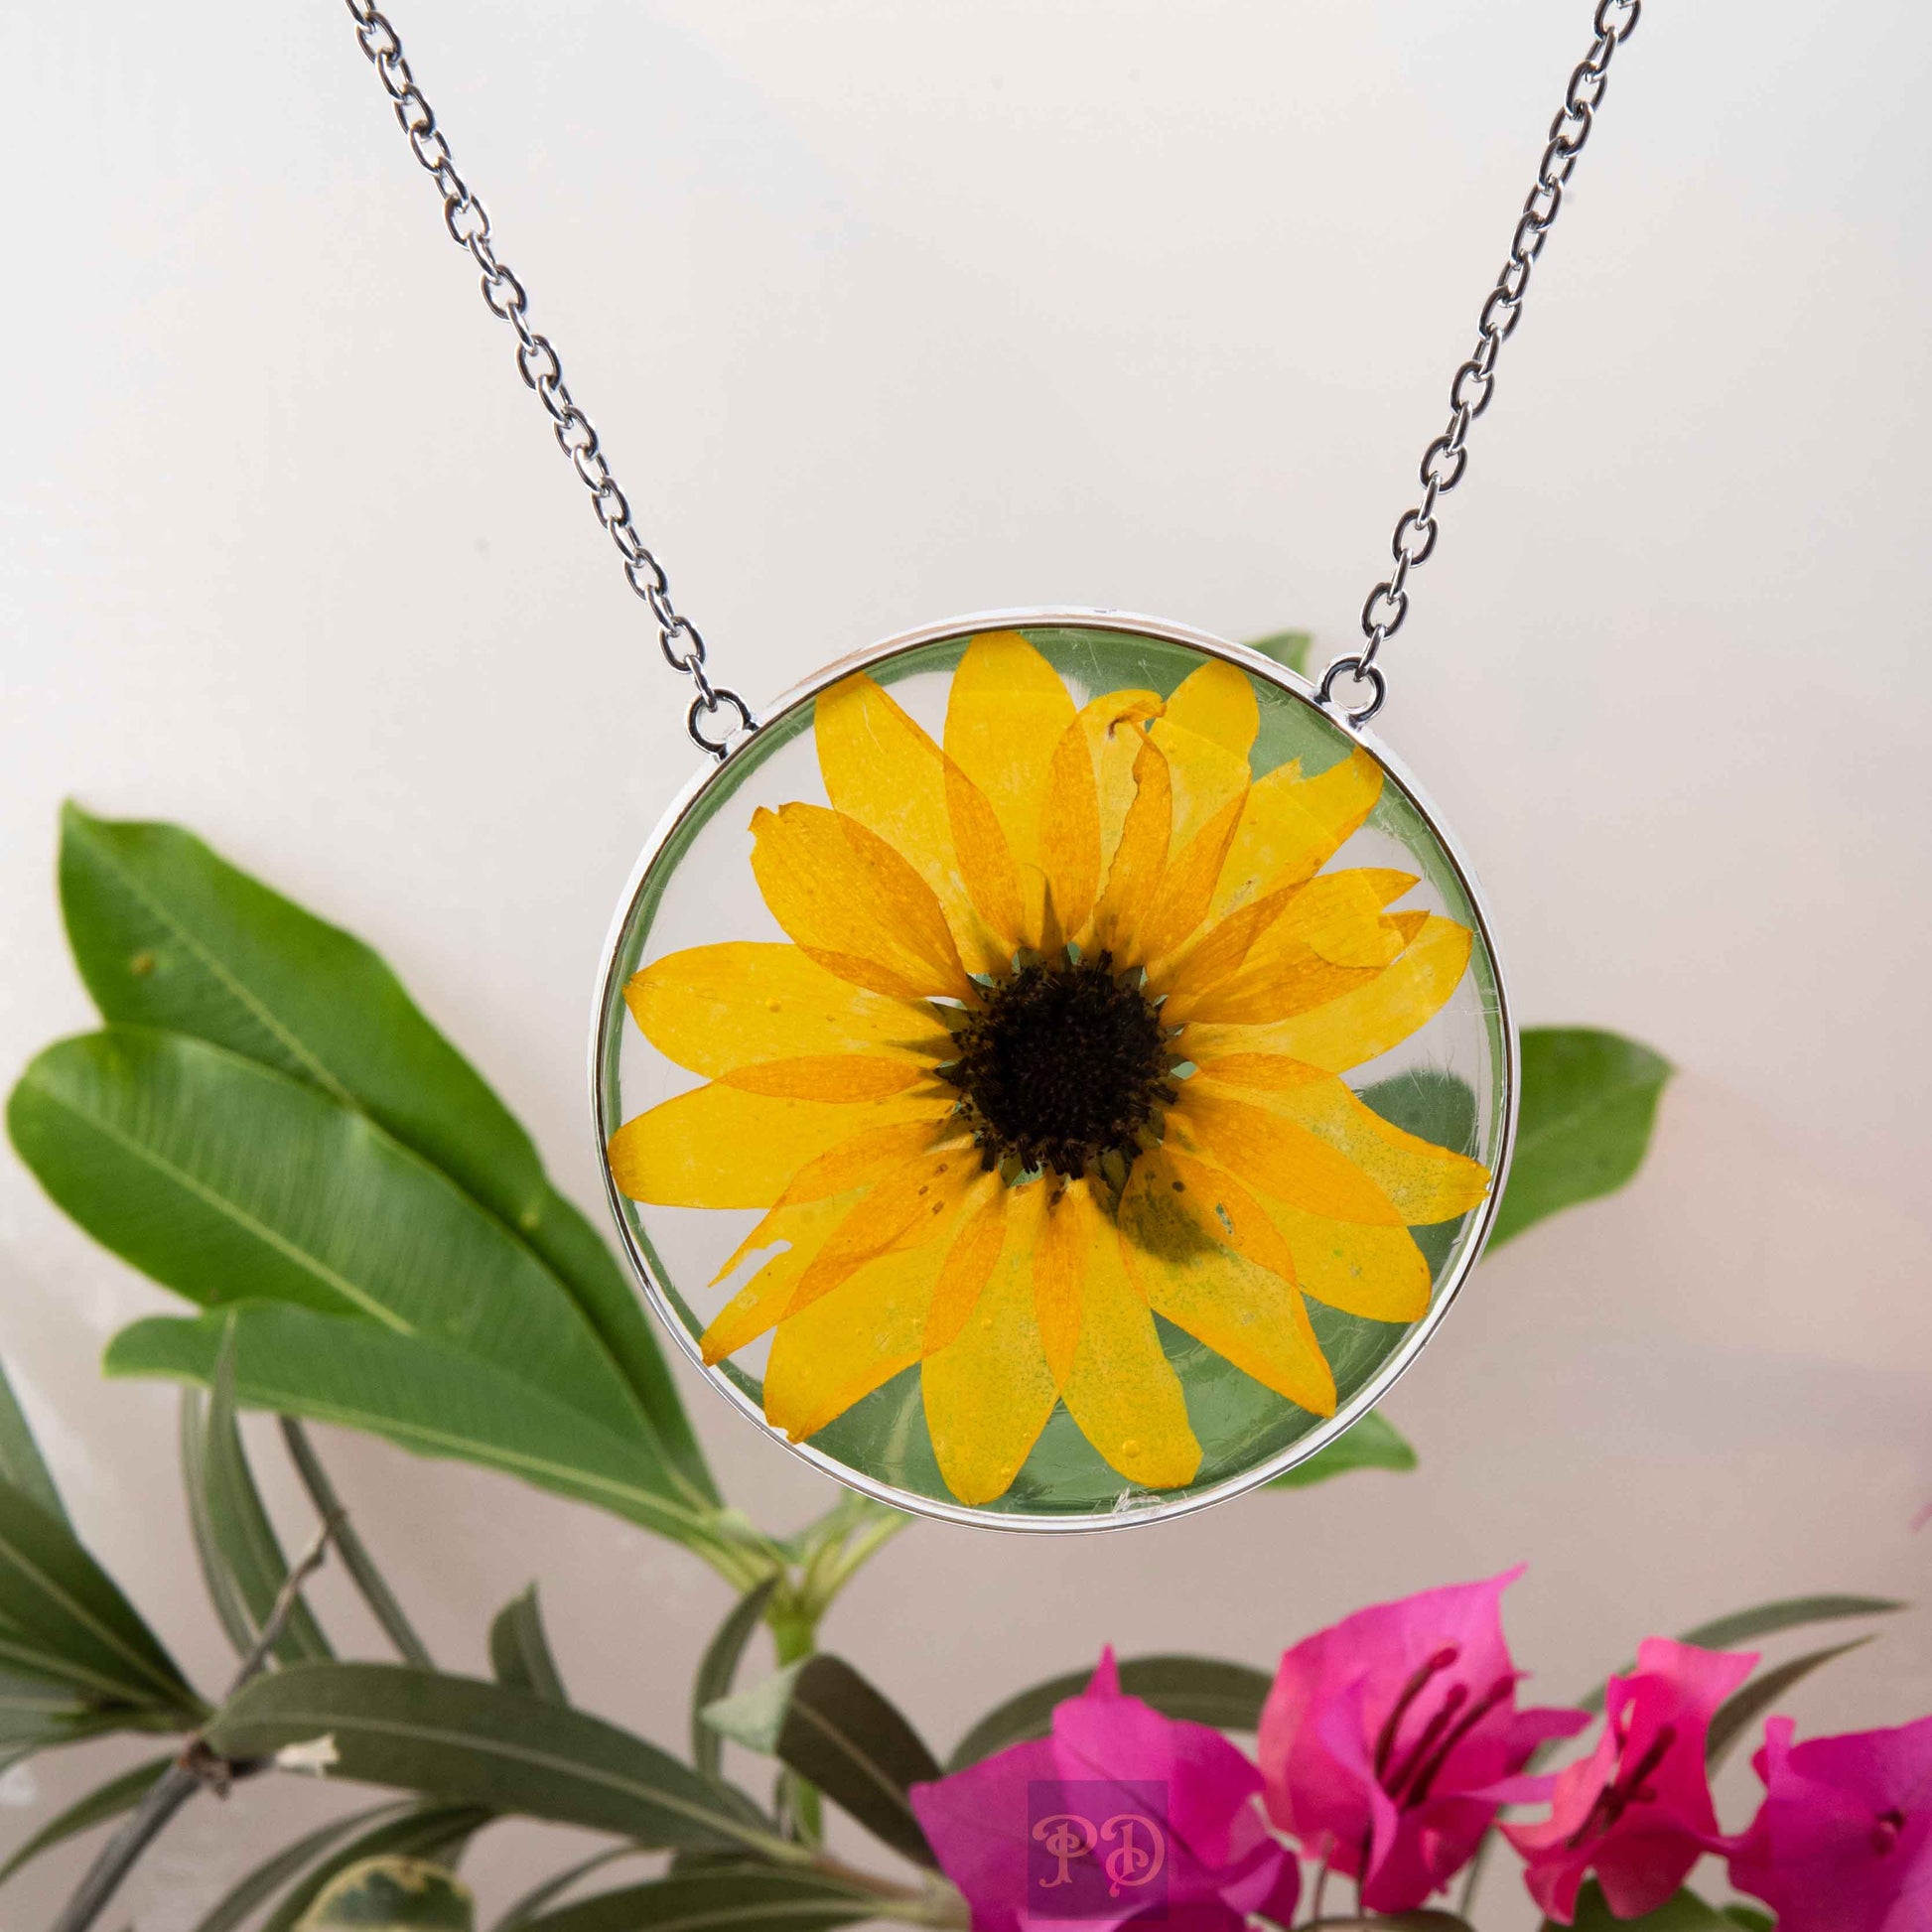 The Sunflower Necklace